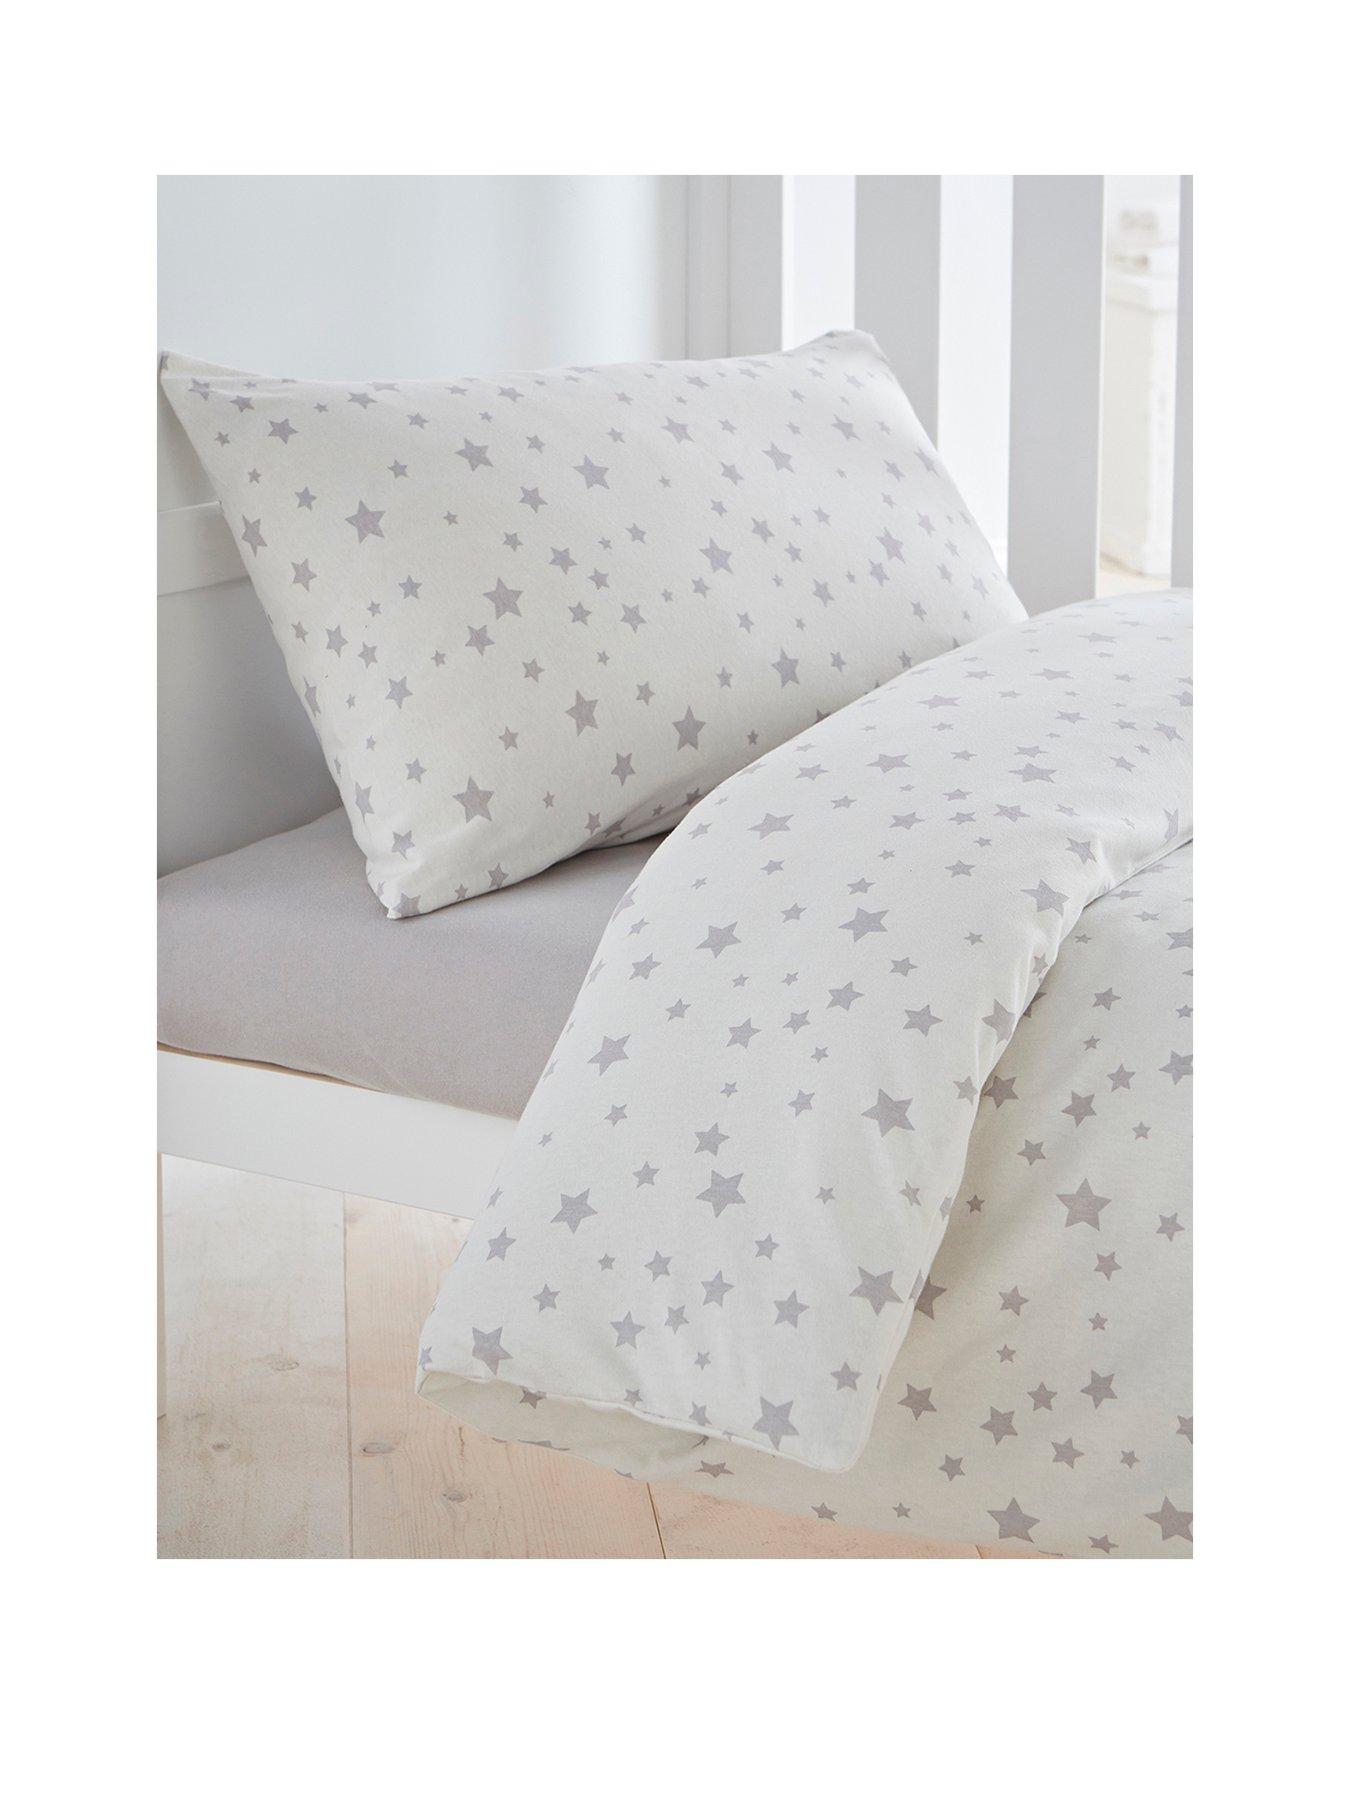 Silentnight Printed Stars Cot Bed Duvet Cover Very Co Uk